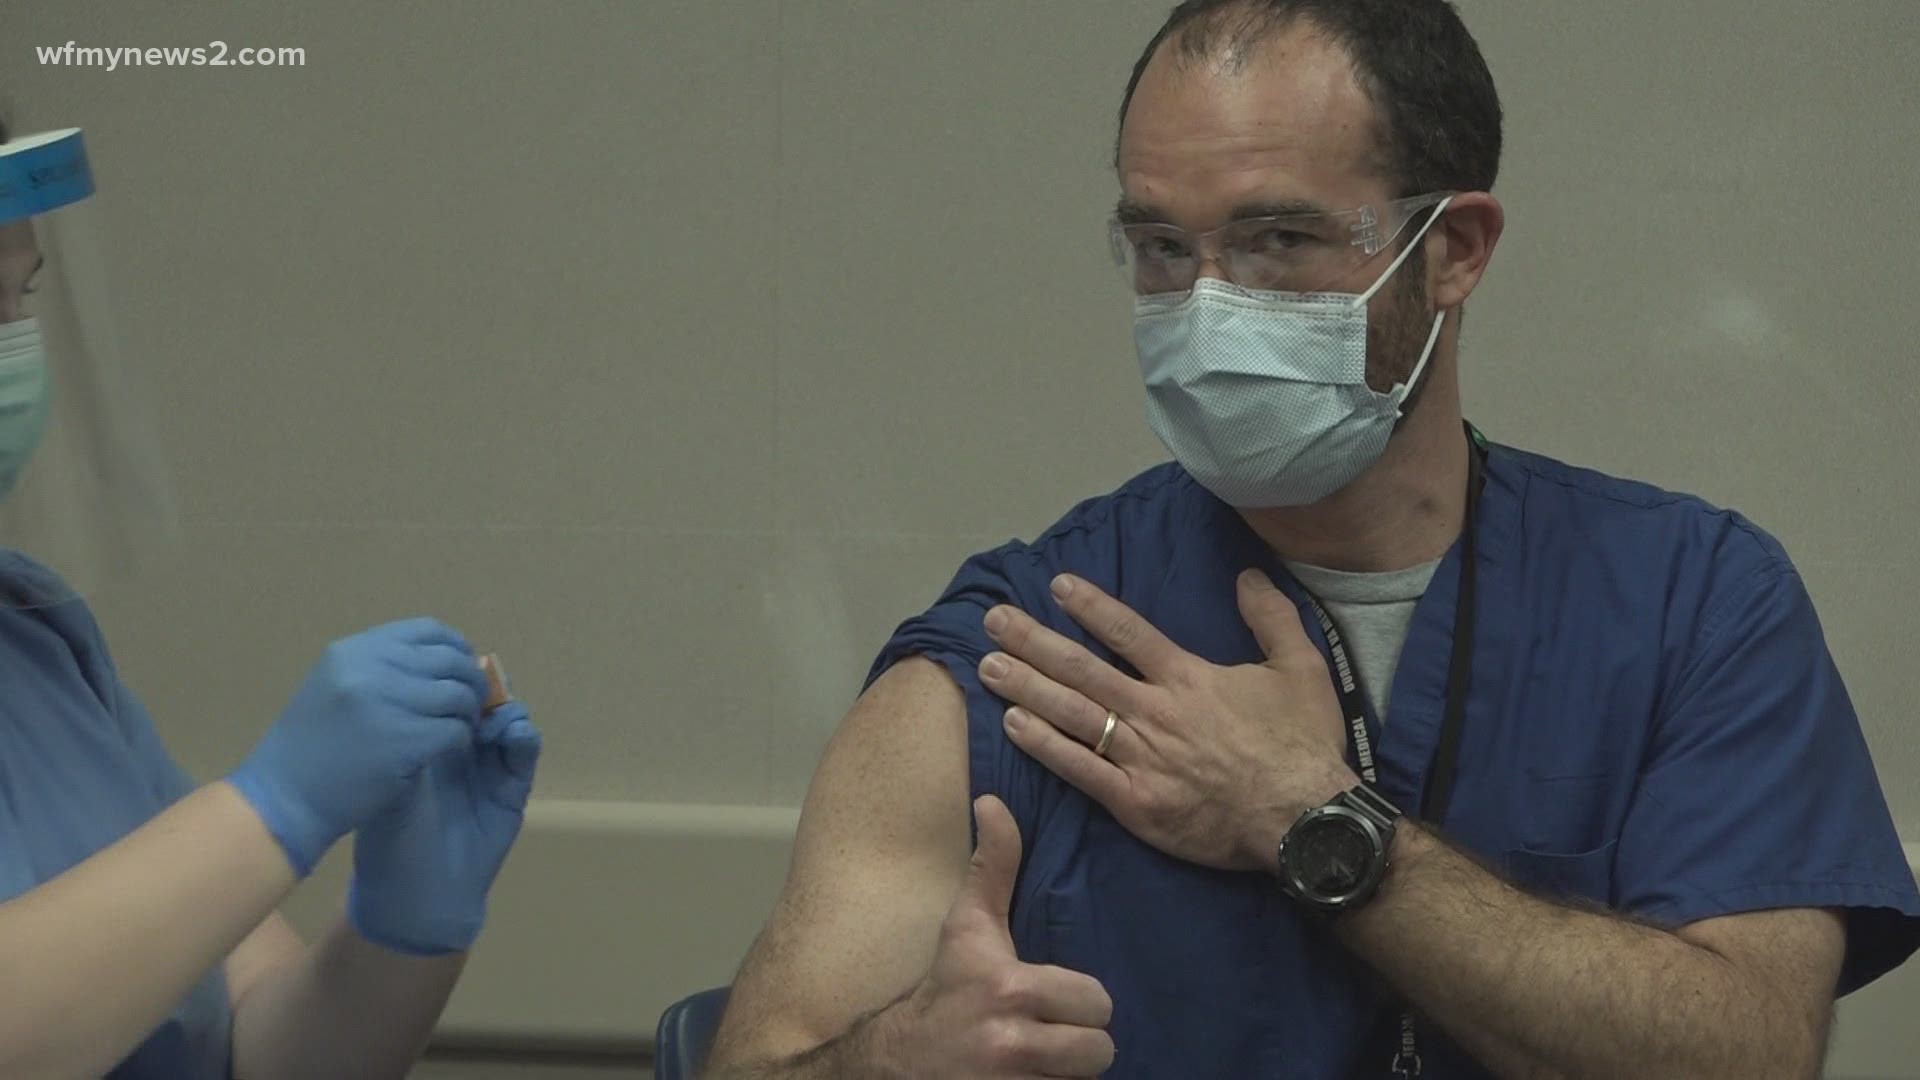 Cone Health says more than 50 employees got the shot on the first day of COVID-19 vaccinations.